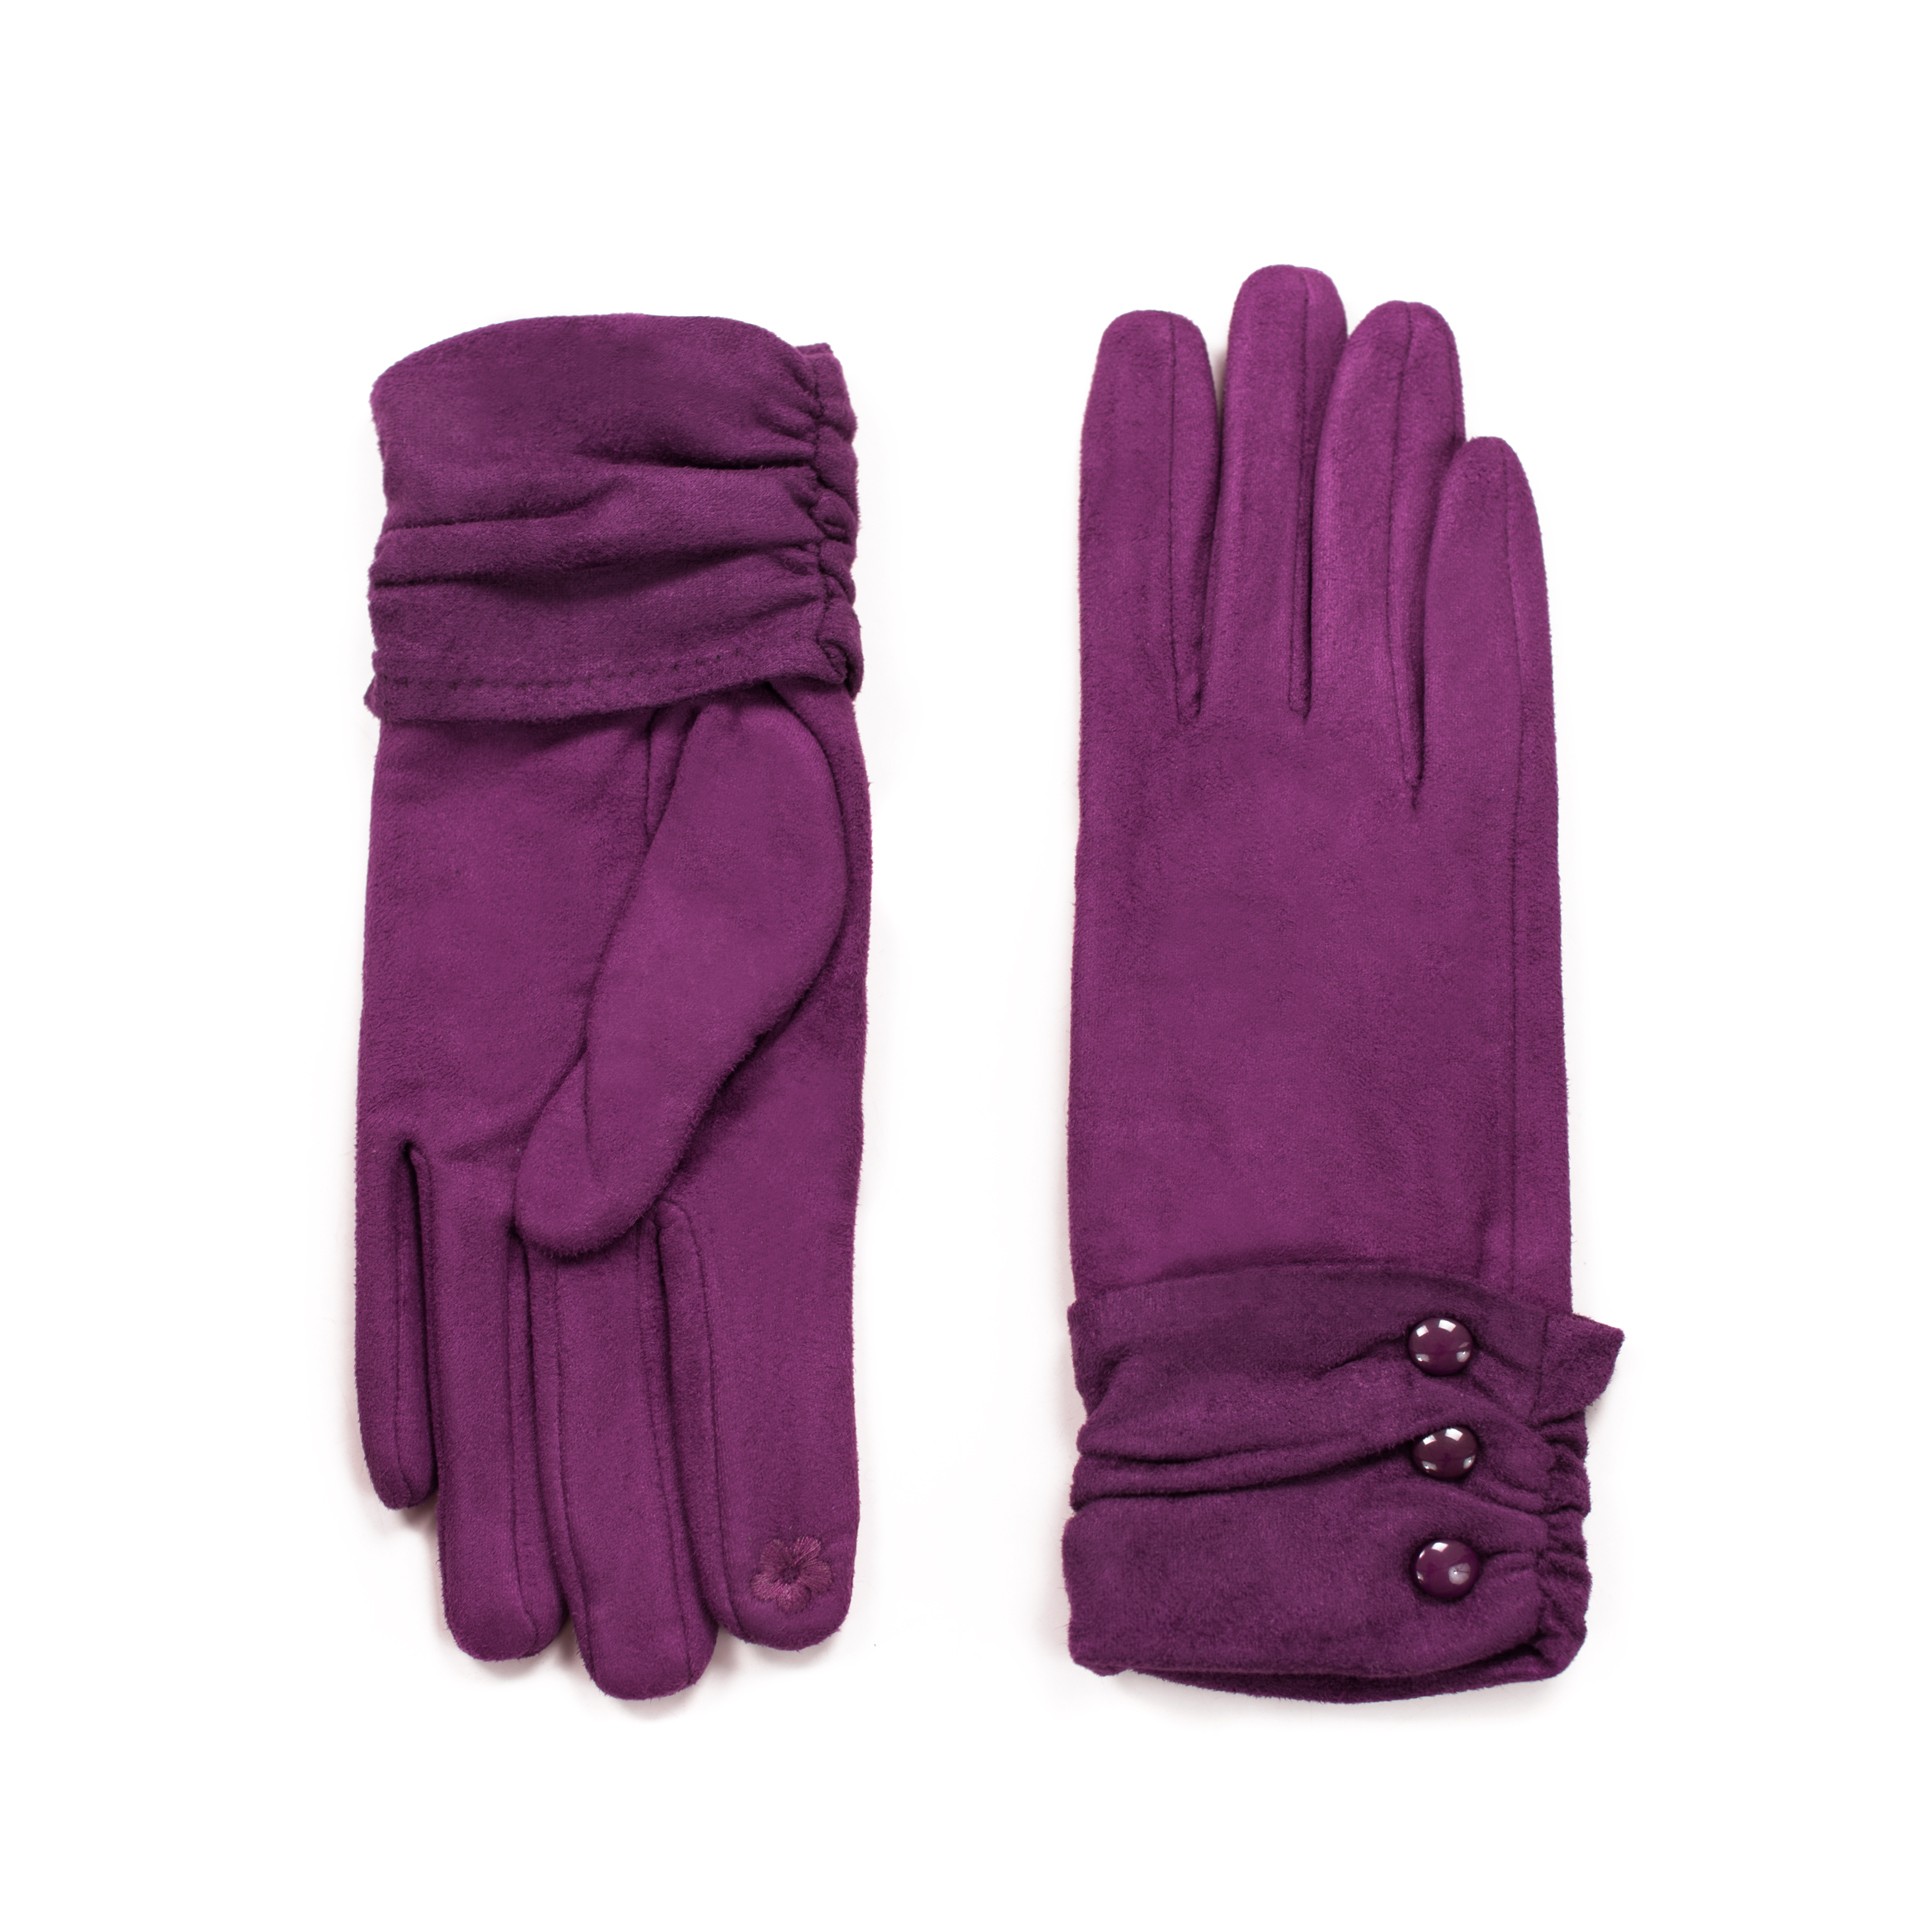 Art Of Polo Woman's Gloves rk18412